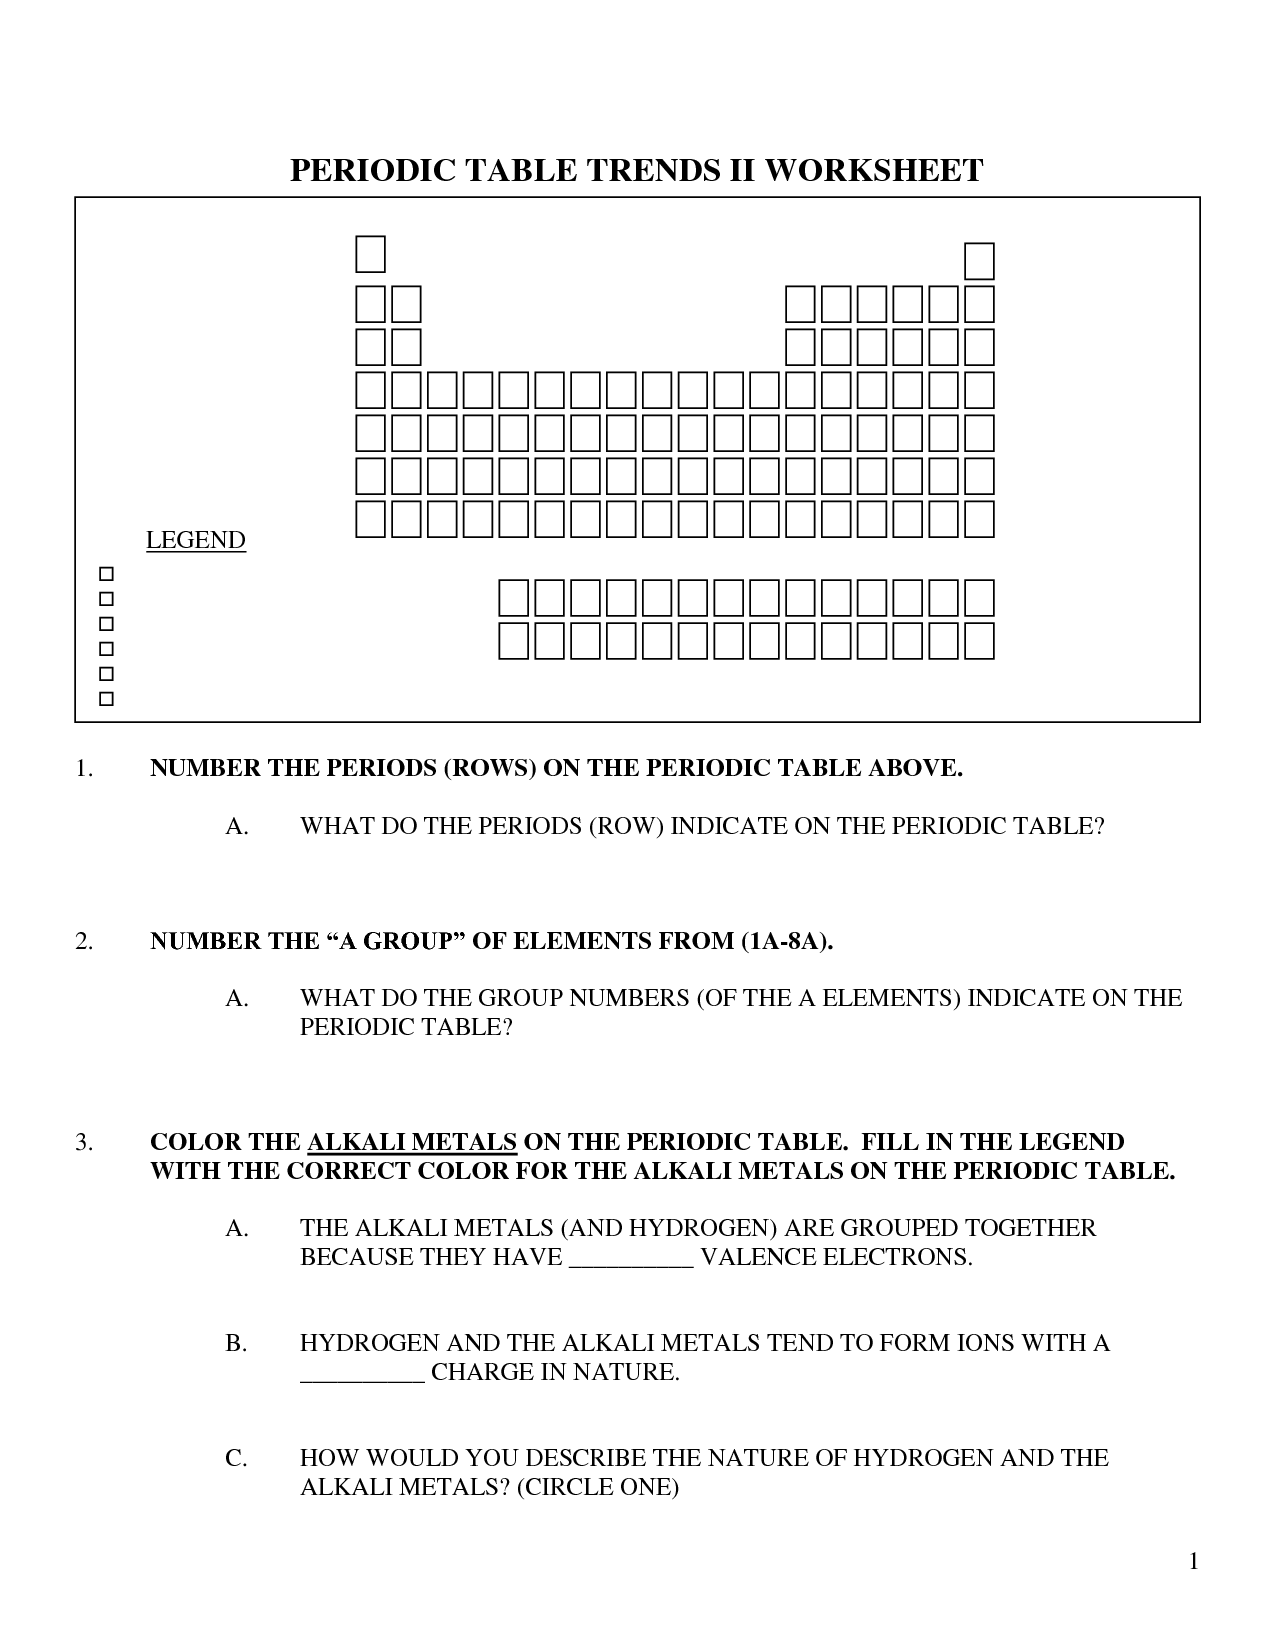 Periodic Table Trends Worksheet Image